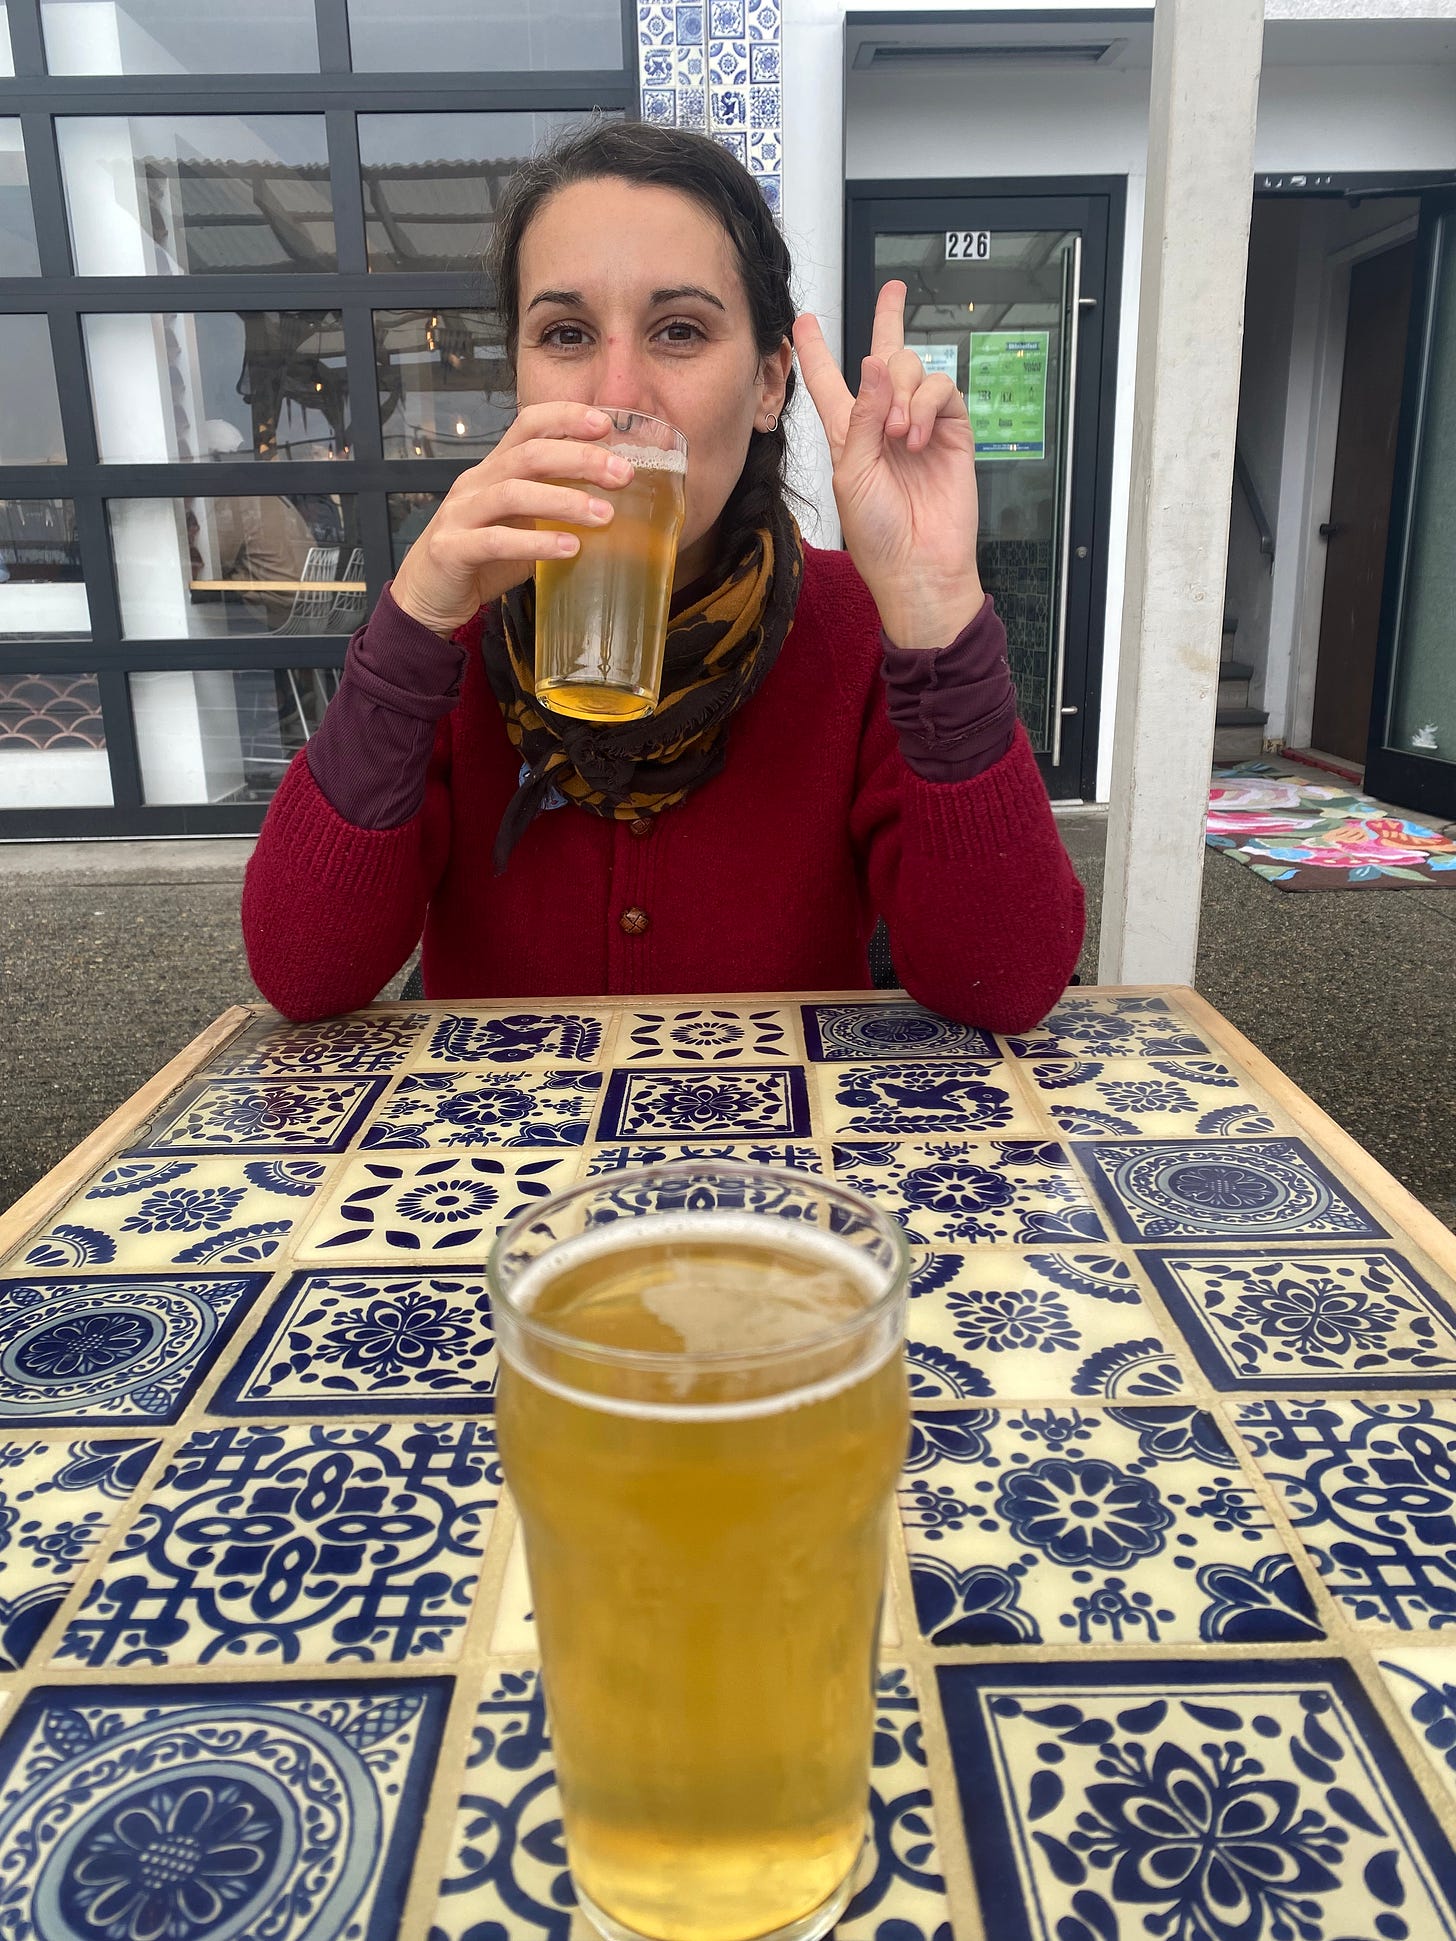 Amanda wearing a red sweater and dark patterned scarf over a maroon long-sleeved shirt, holding a beer up to her mouth and giving a peace sign. She's across a table patterned with blue and white painted tiles. My own beers is in the centre of frame in the foreground. The sidewalk in the background is wet from rain, and the garage door of the brewery is closed.